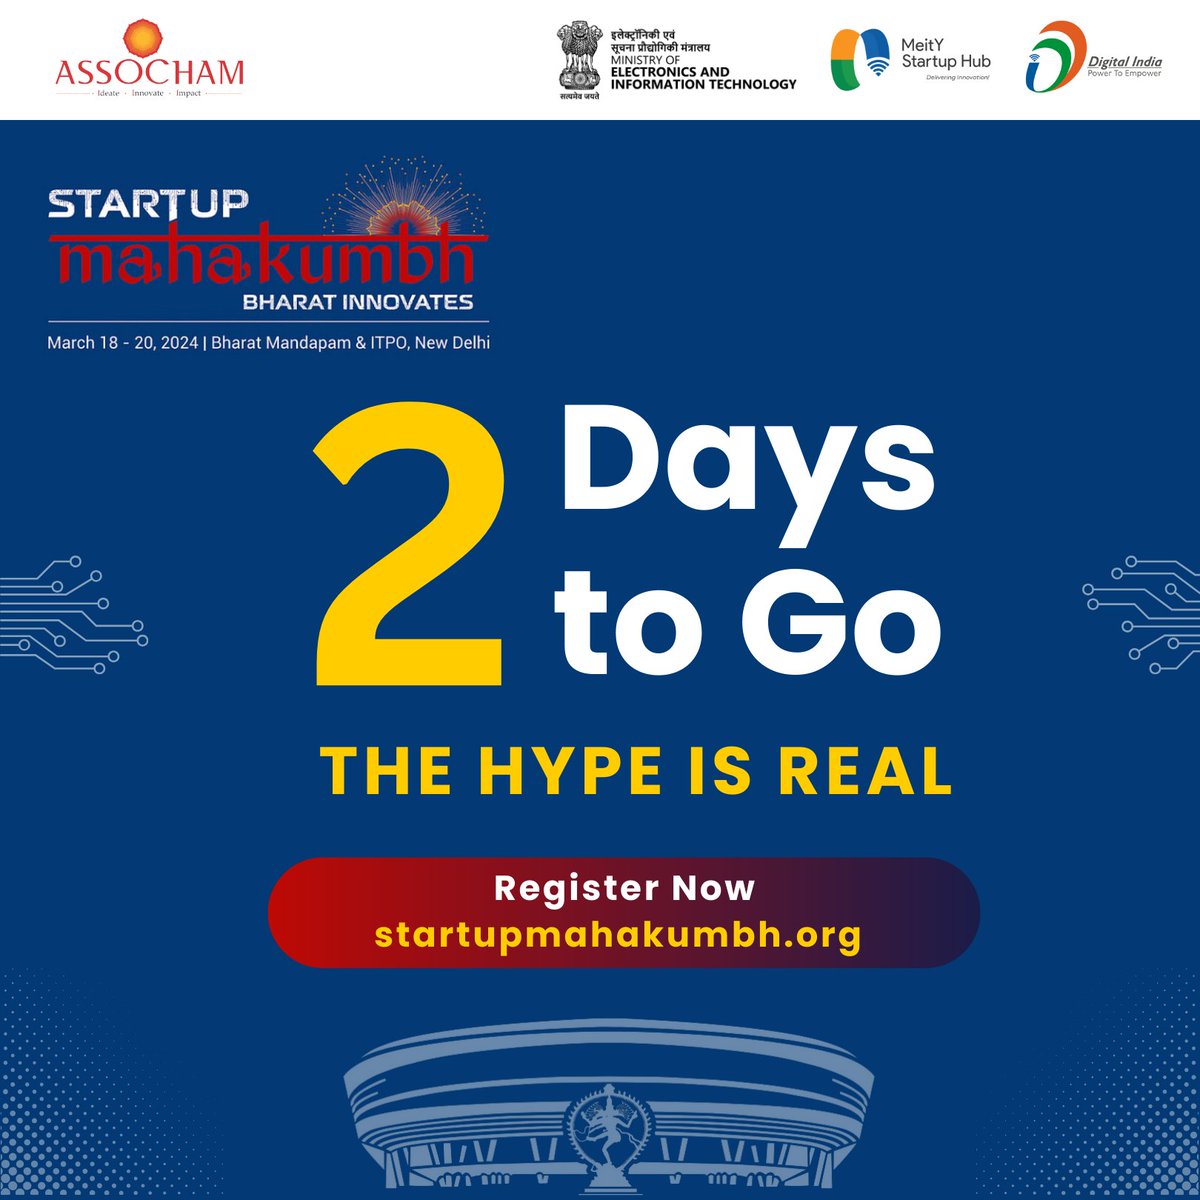 Don't wait until it's too late. Secure your ticket to #StartupMahakumbh, a first-of-its-kind startup event of the season, and unlock endless networking opportunities with India's brightest startups and investors. Register today -> startupmahakumbh.org